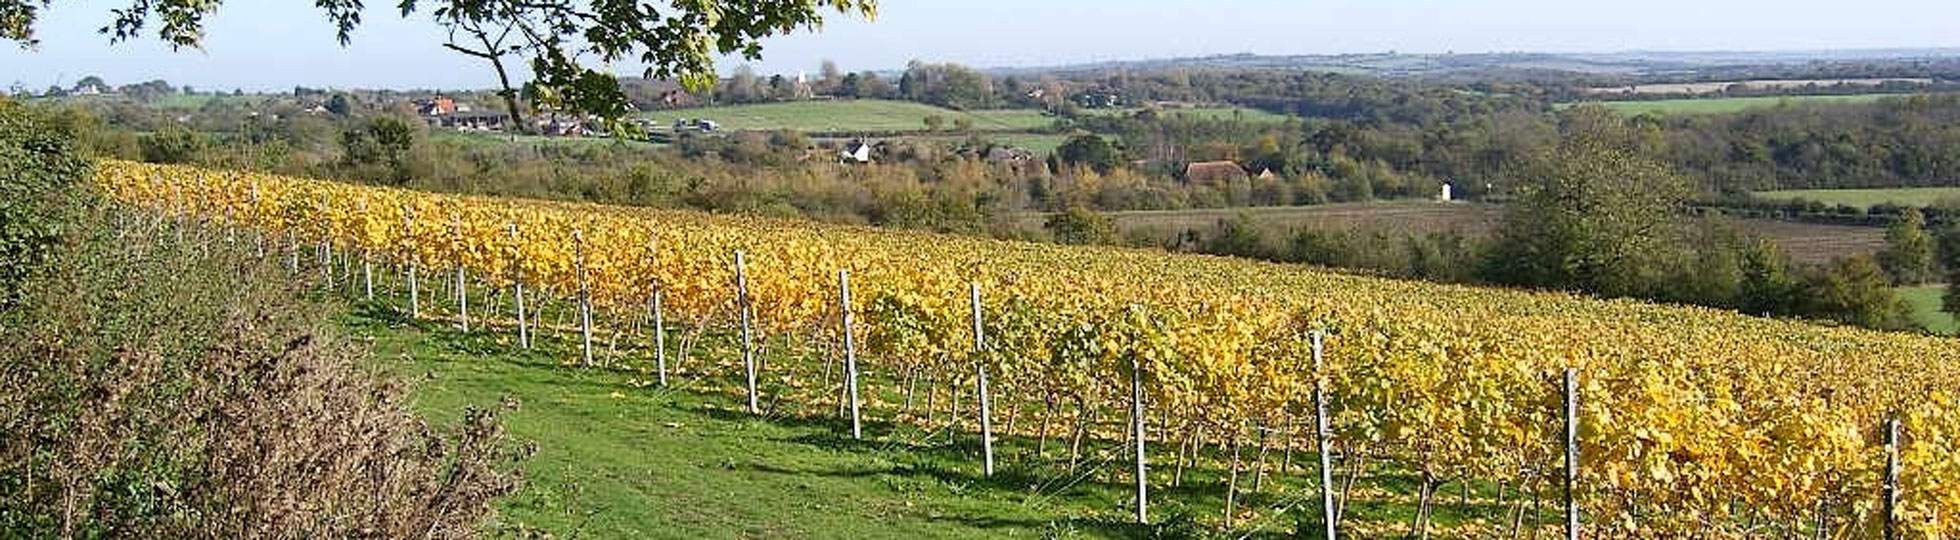 After the harvest of Pinot Noir & Chardonnay at Martin’s Lane, Stow Maries, Essex